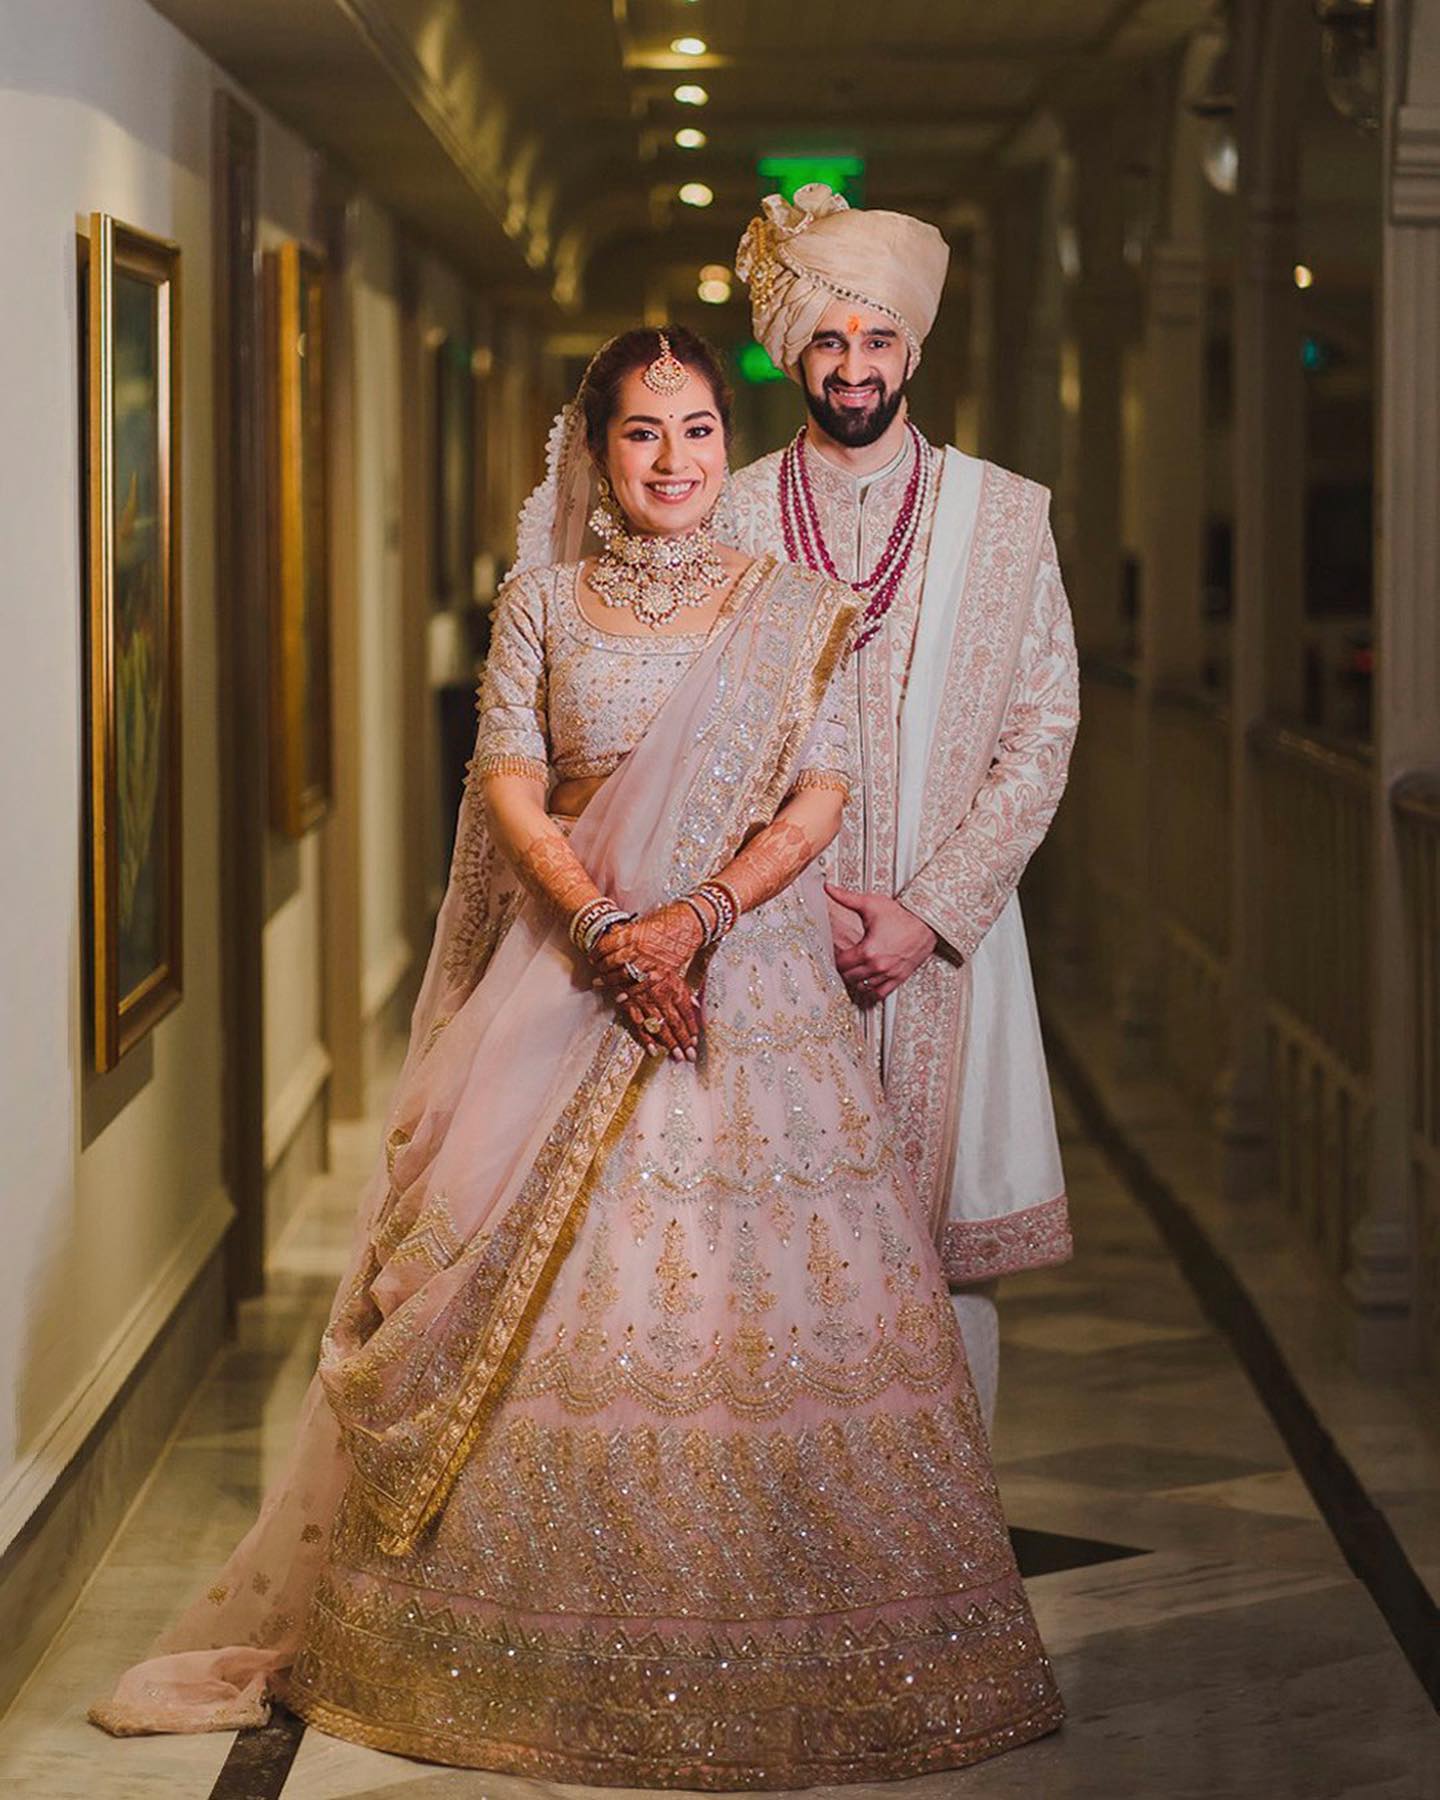 An Intimate Kerala Wedding With The Bride In A Blush Pink Lehenga | Wedding  outfit, Indian bridal outfits, Marriage dress